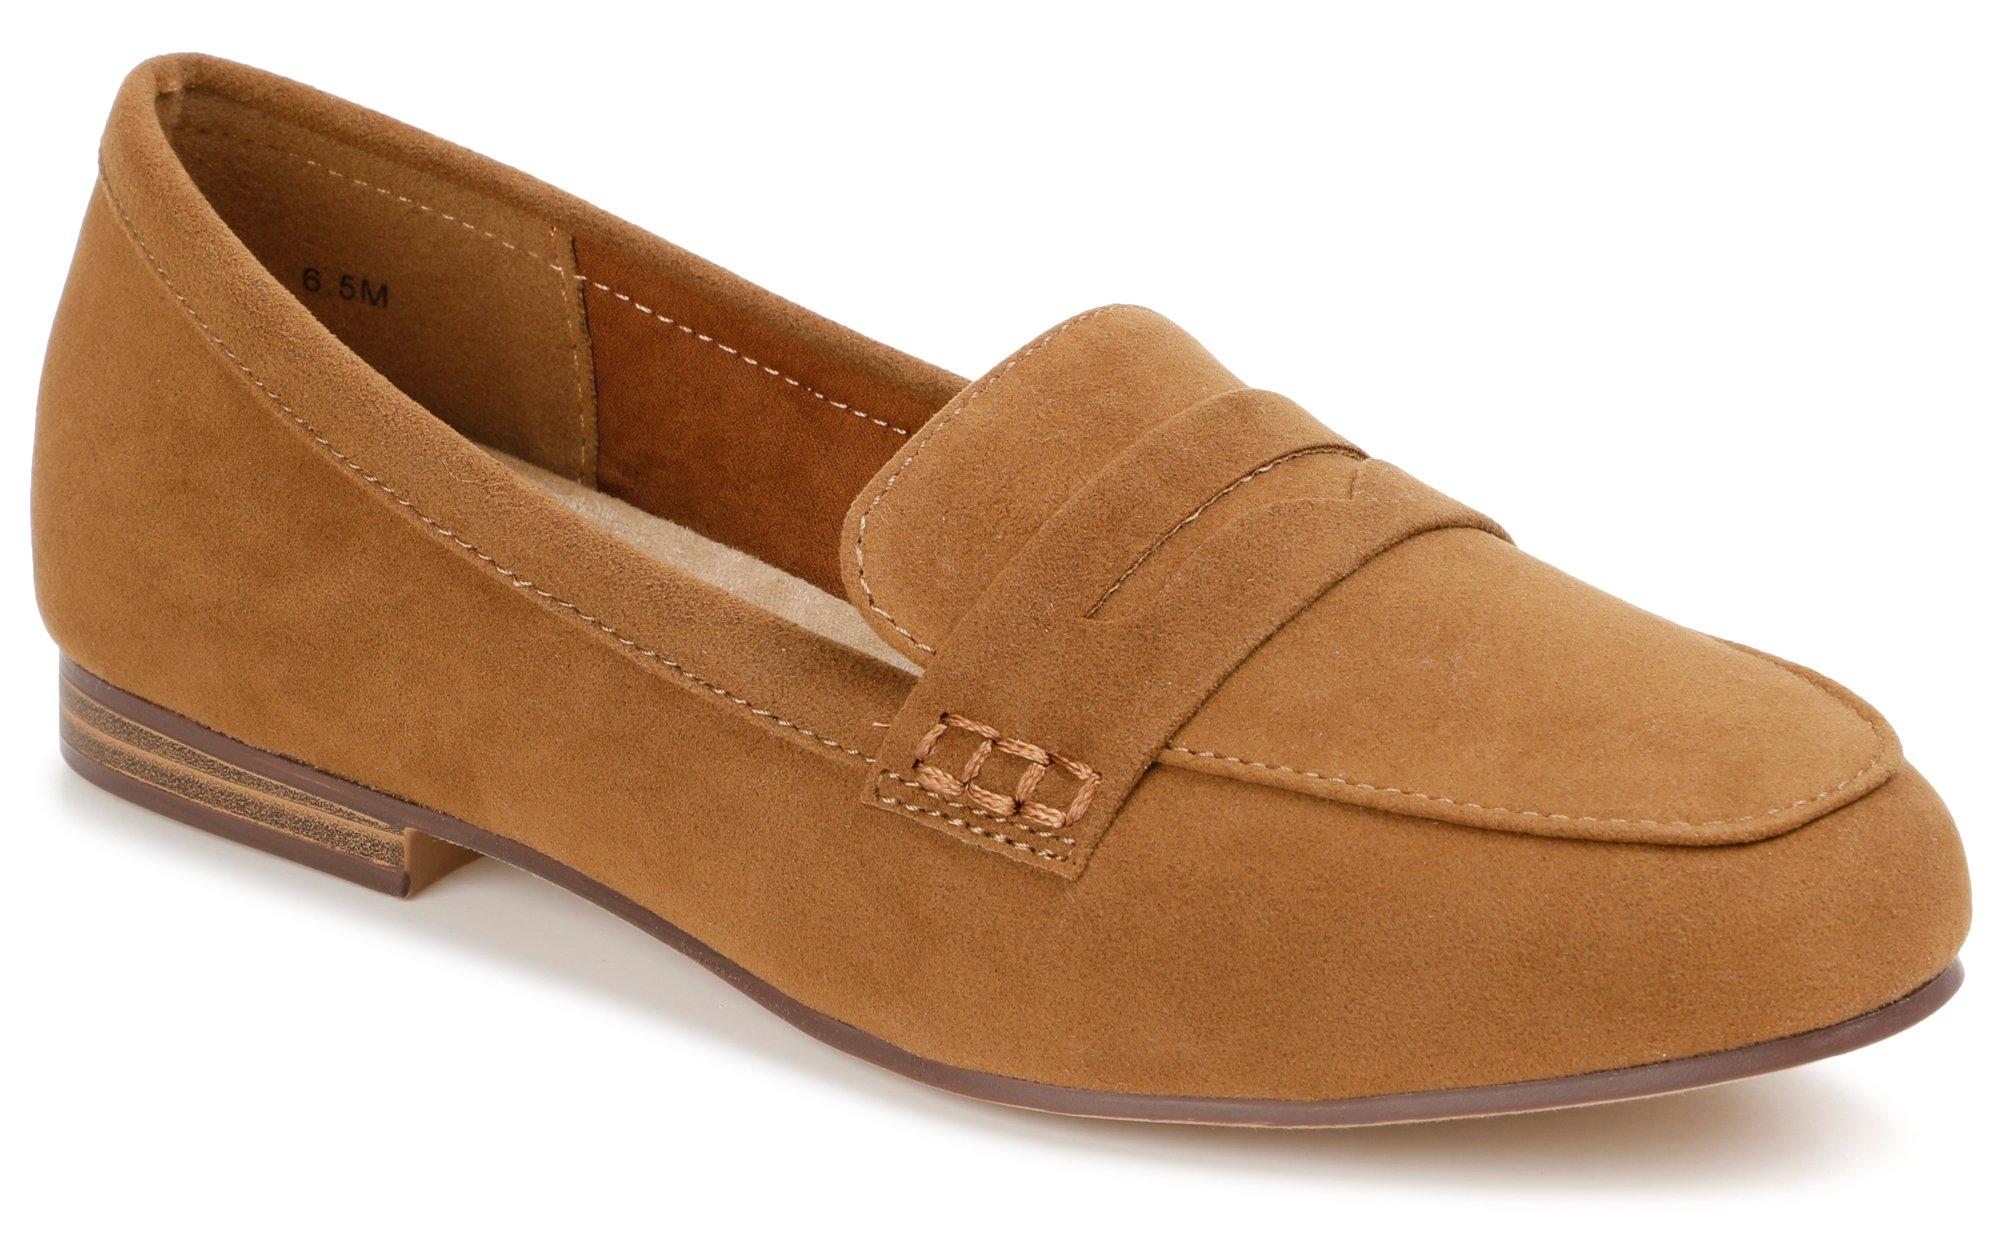 Women's Suede Loafers